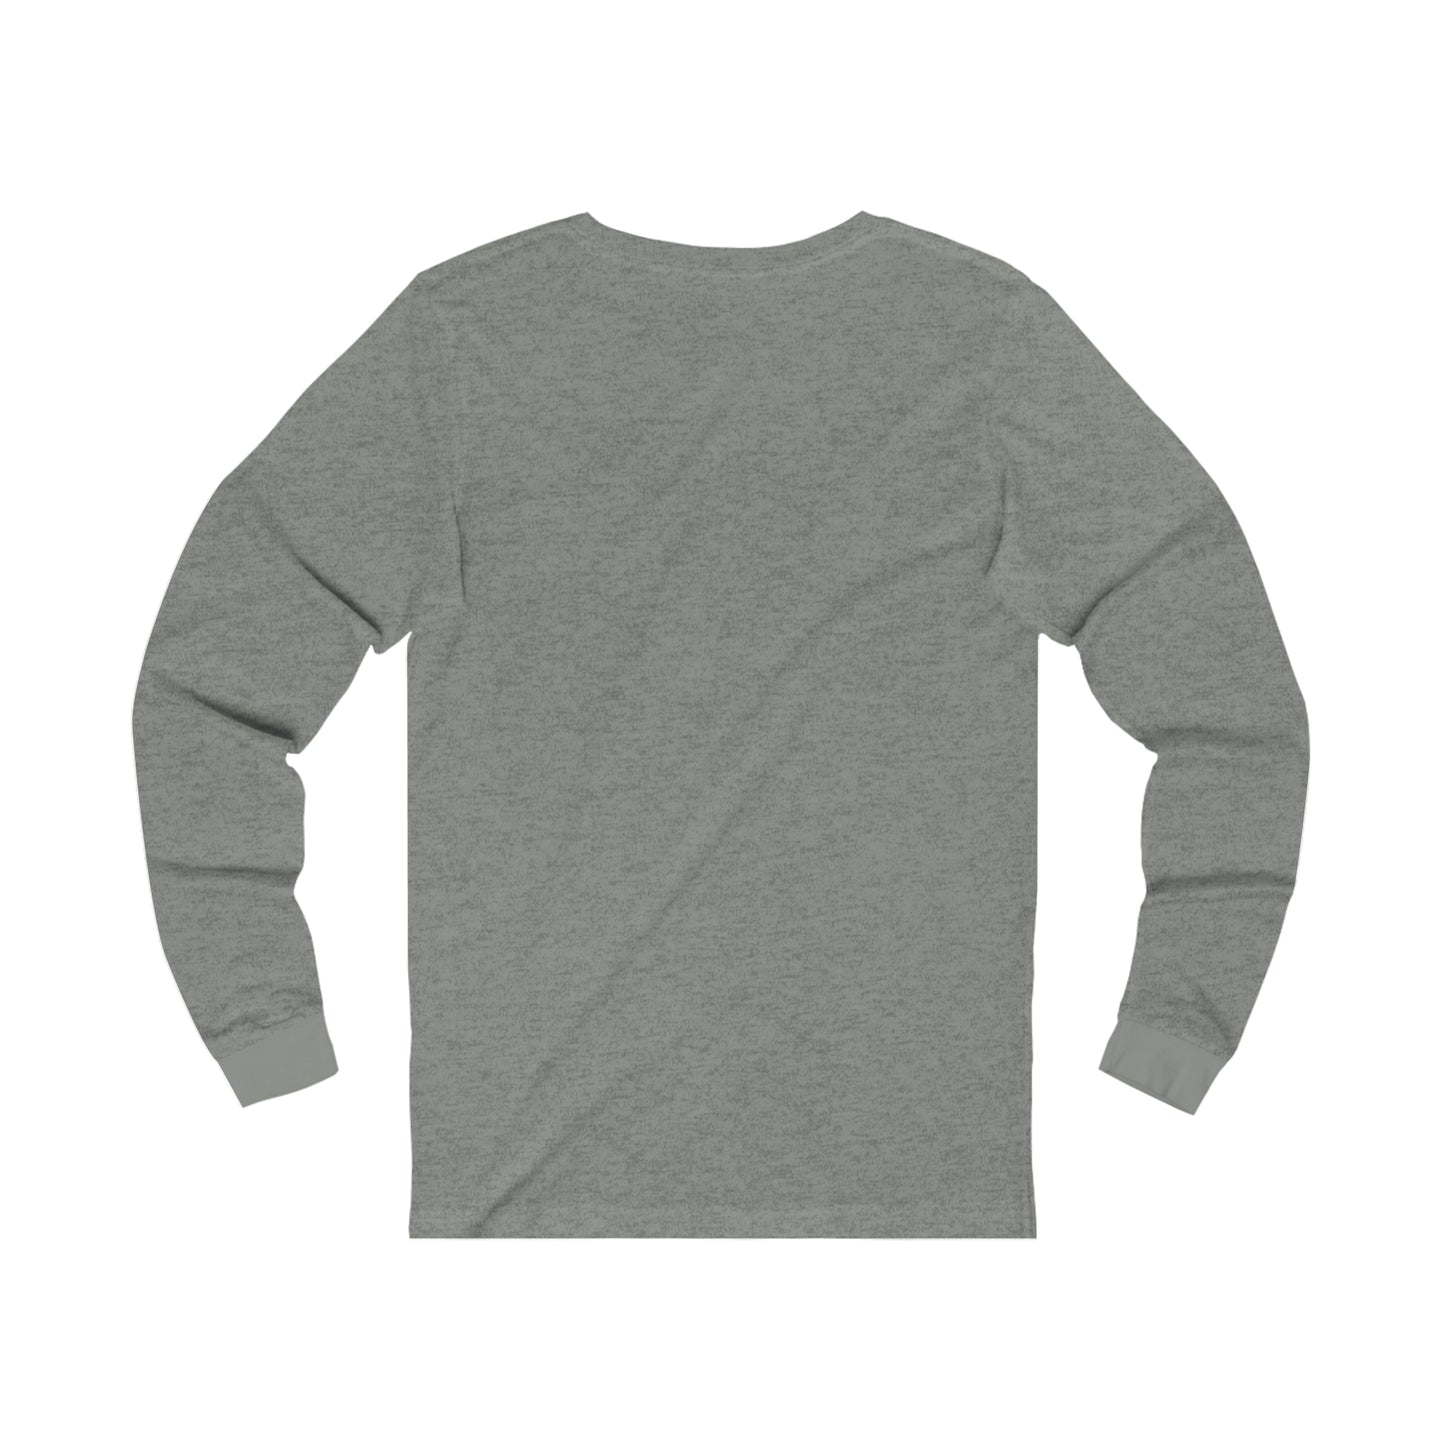 Wandering the Wilderness long sleeve T-shirt big logo on front.